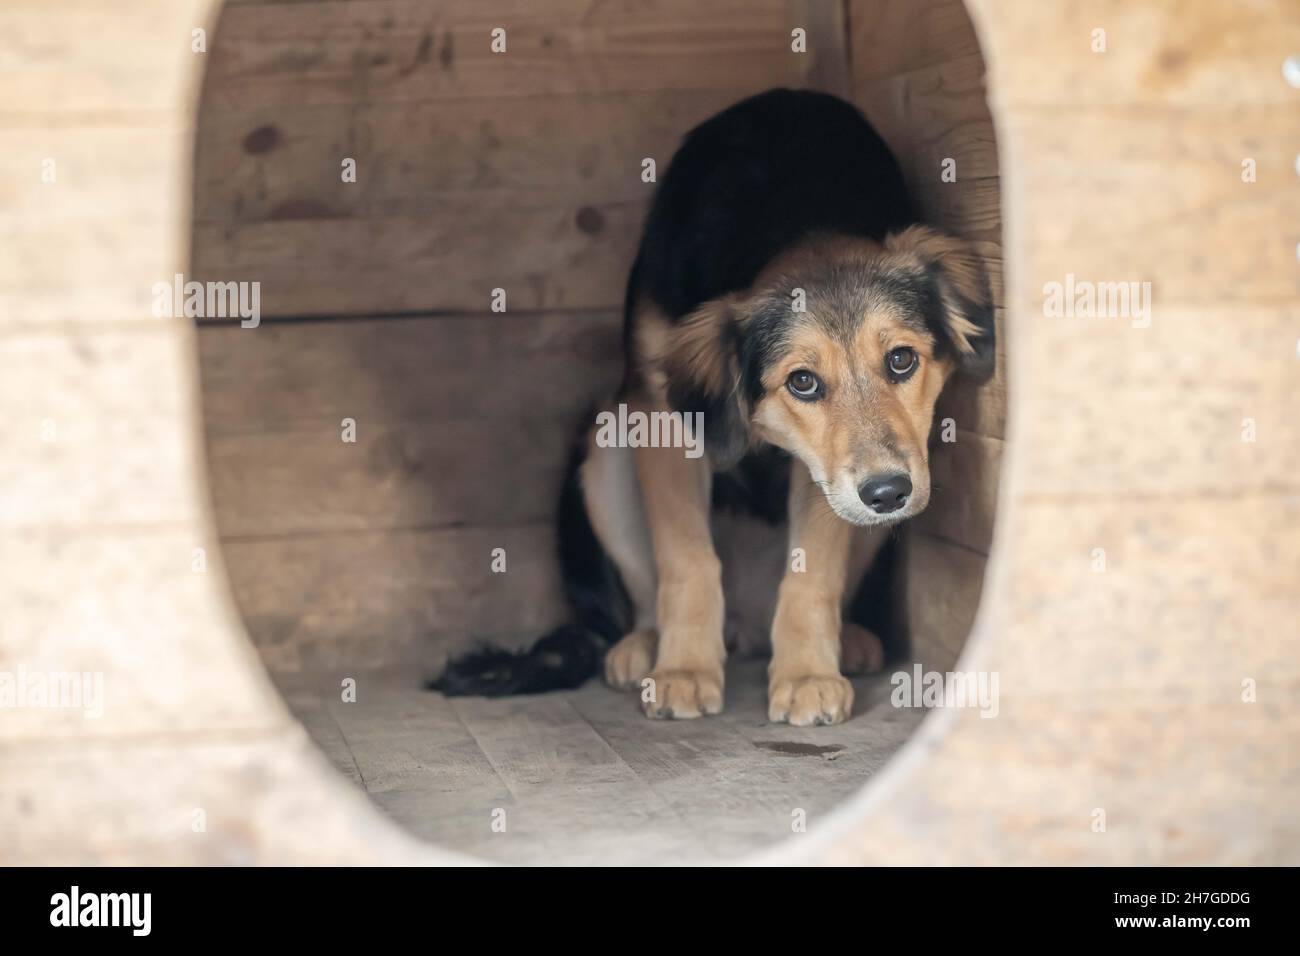 A fearful mongrel dog hides in a booth. Stock Photo